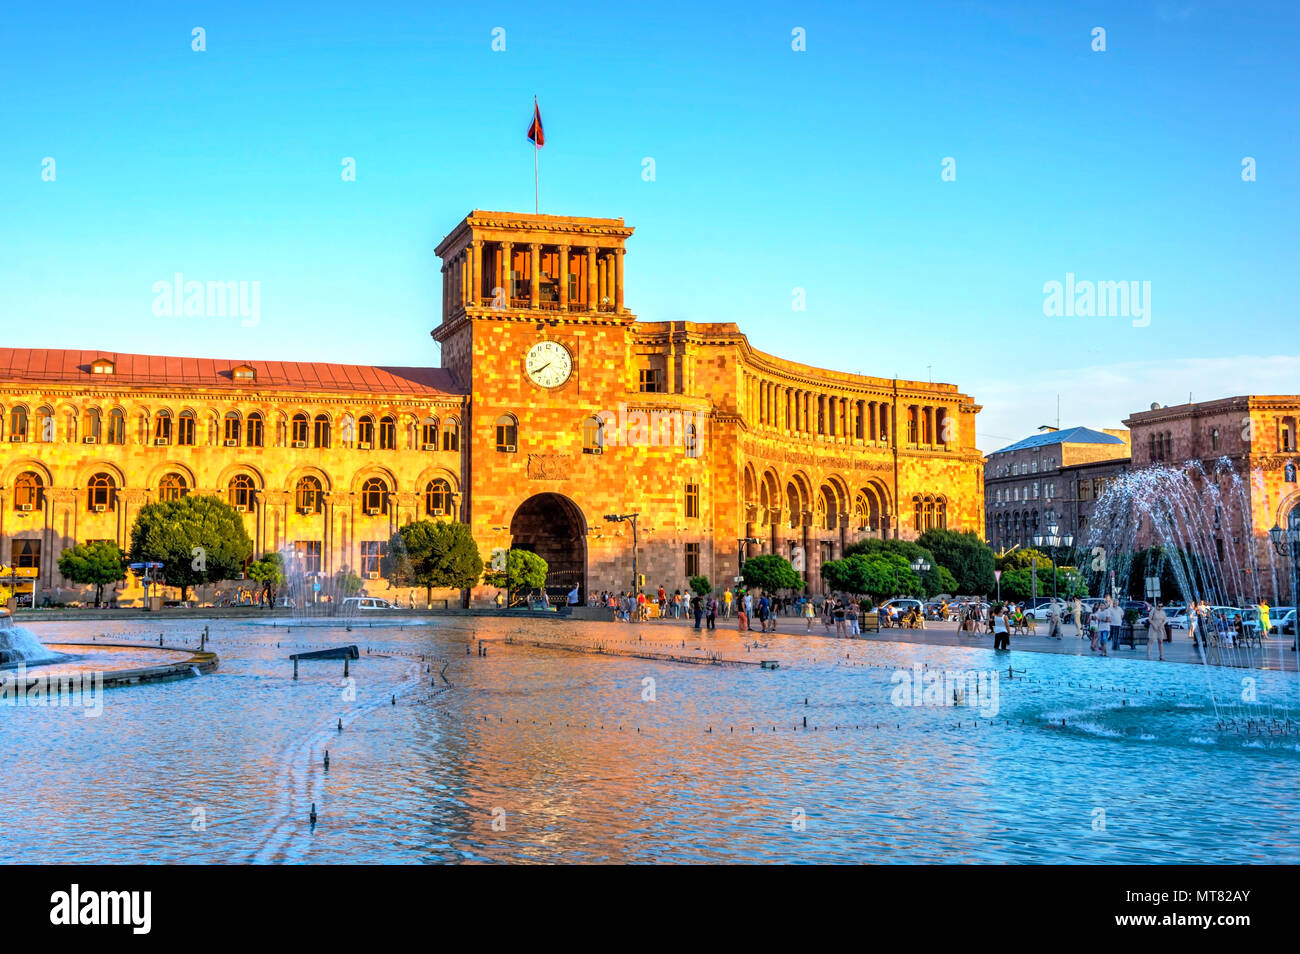 YEREVAN, ARMENIA - AUGUST 2: Republic square with the fountain and clock tower in Armenia capital. August 2017 Stock Photo